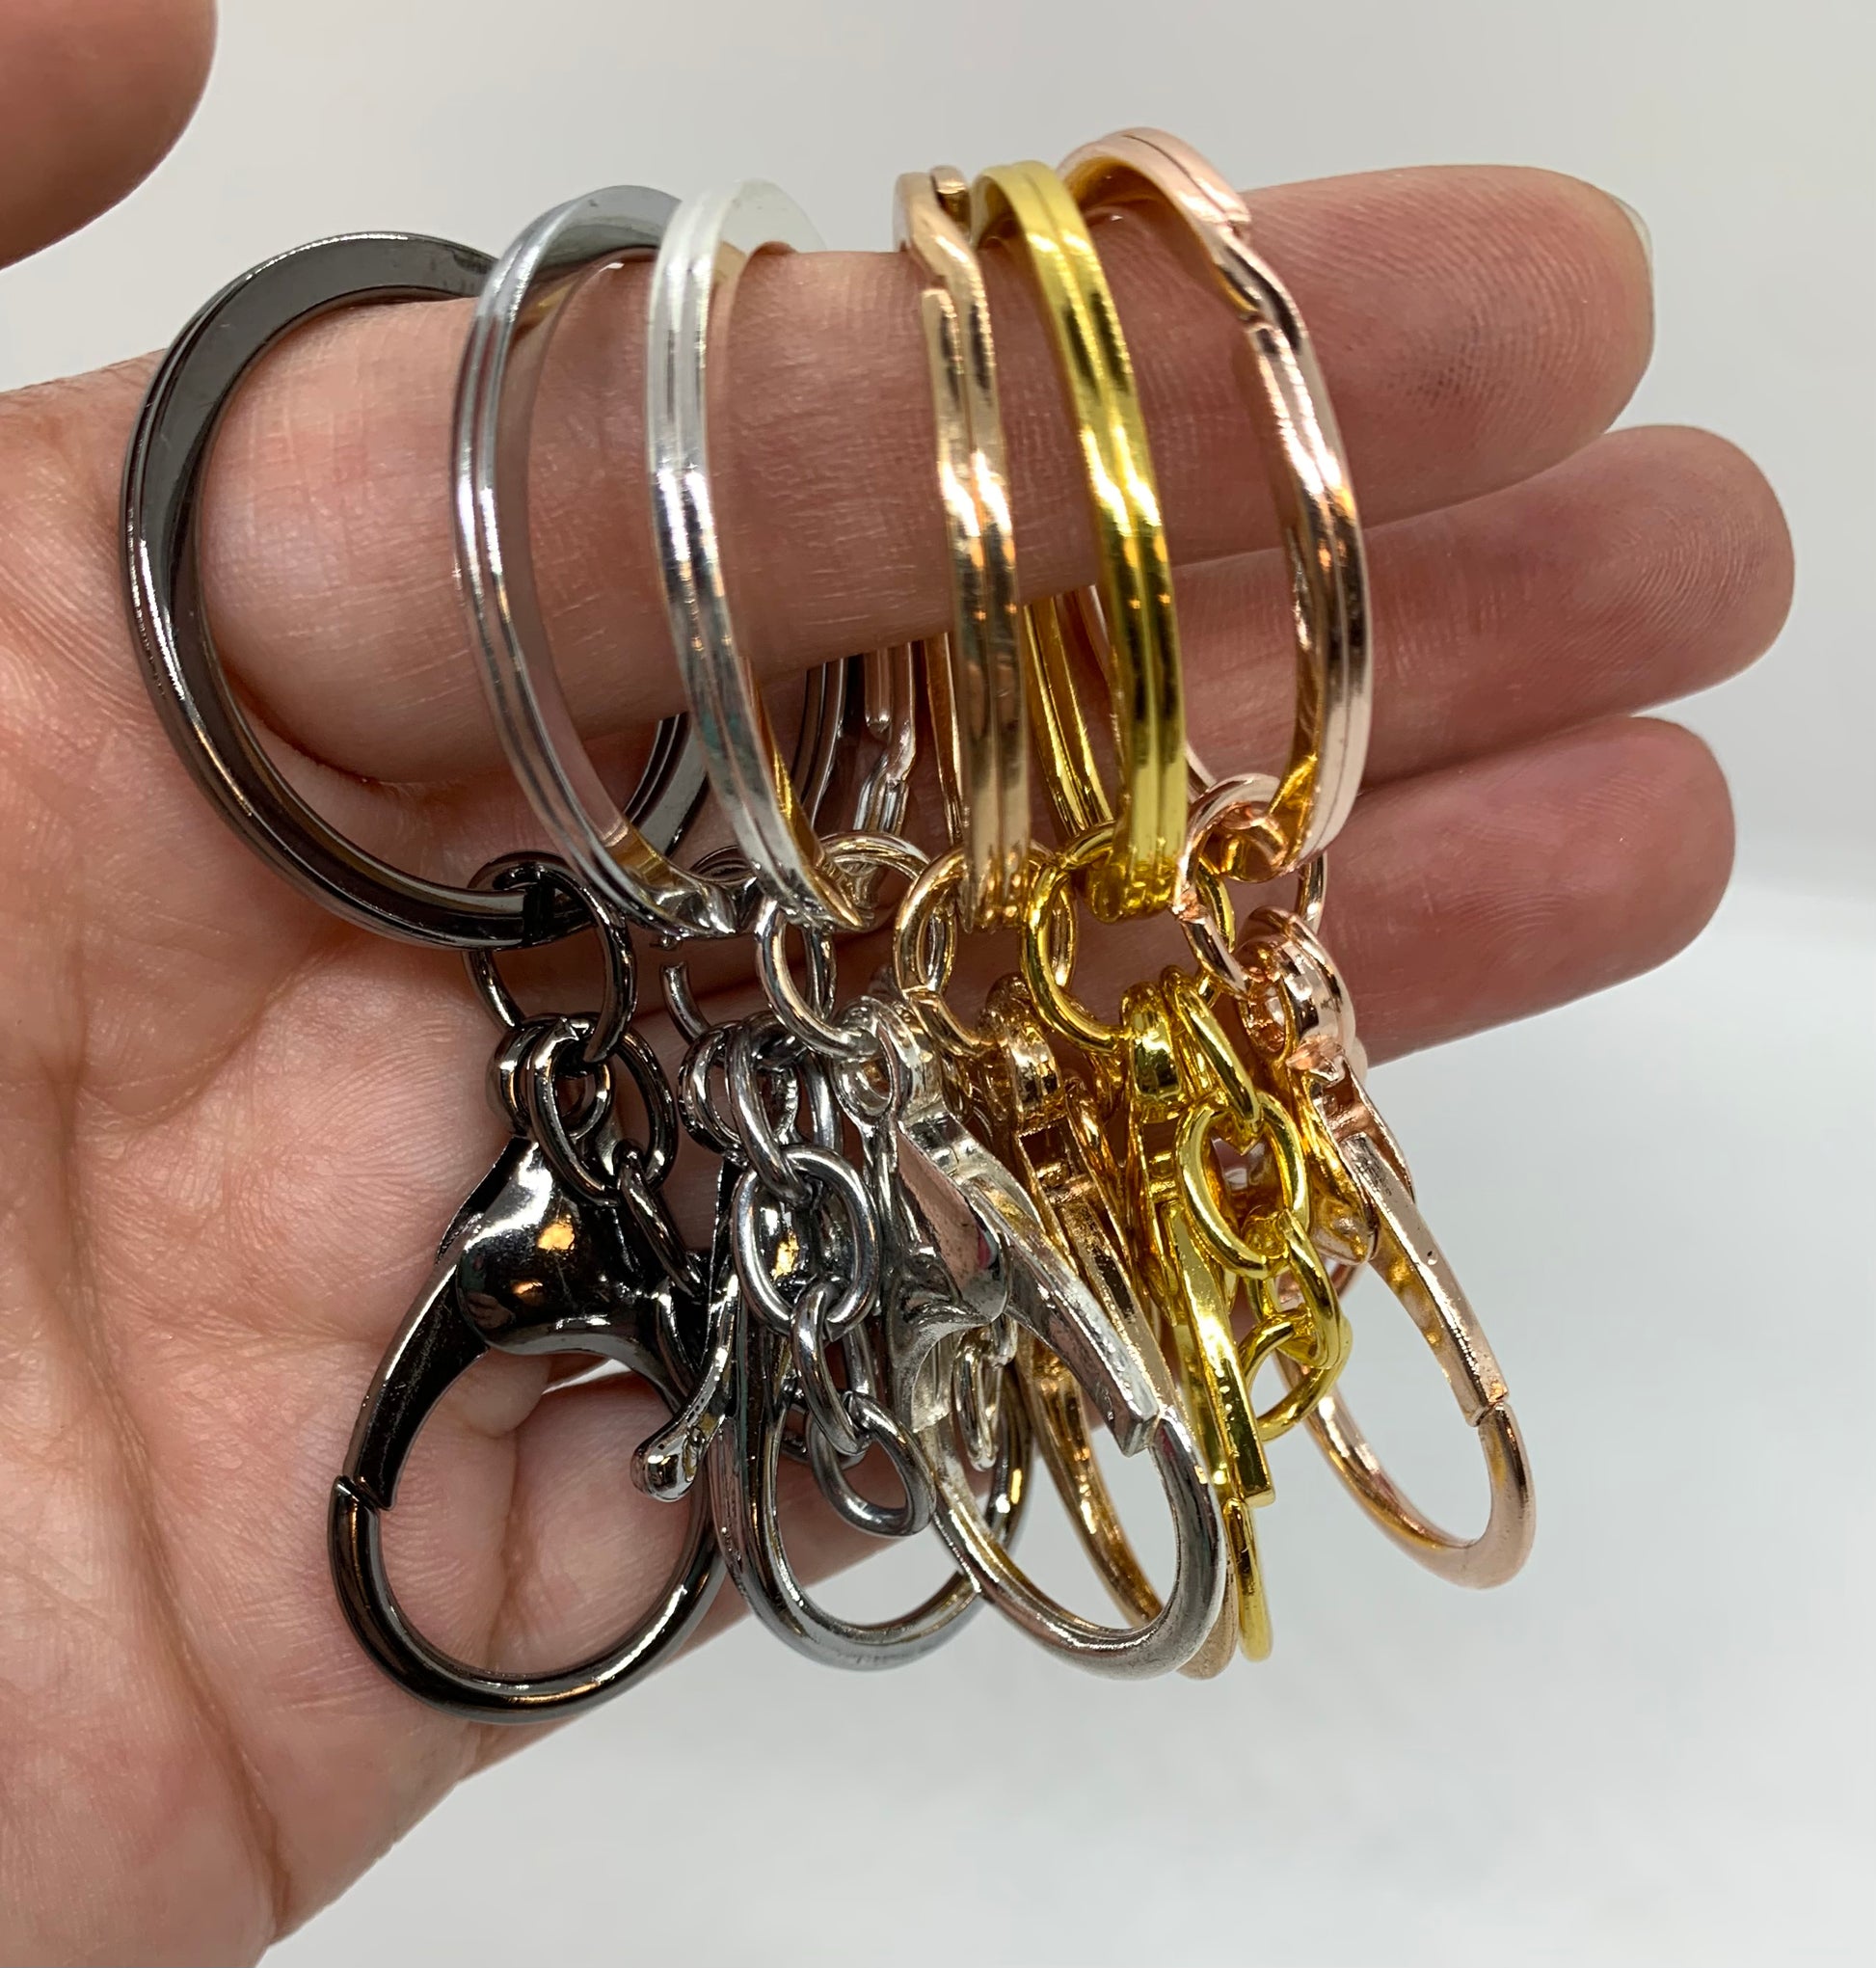 Lobster Claw Keychain Ring, Large Metal Keychain Ring 4. Bright Gold